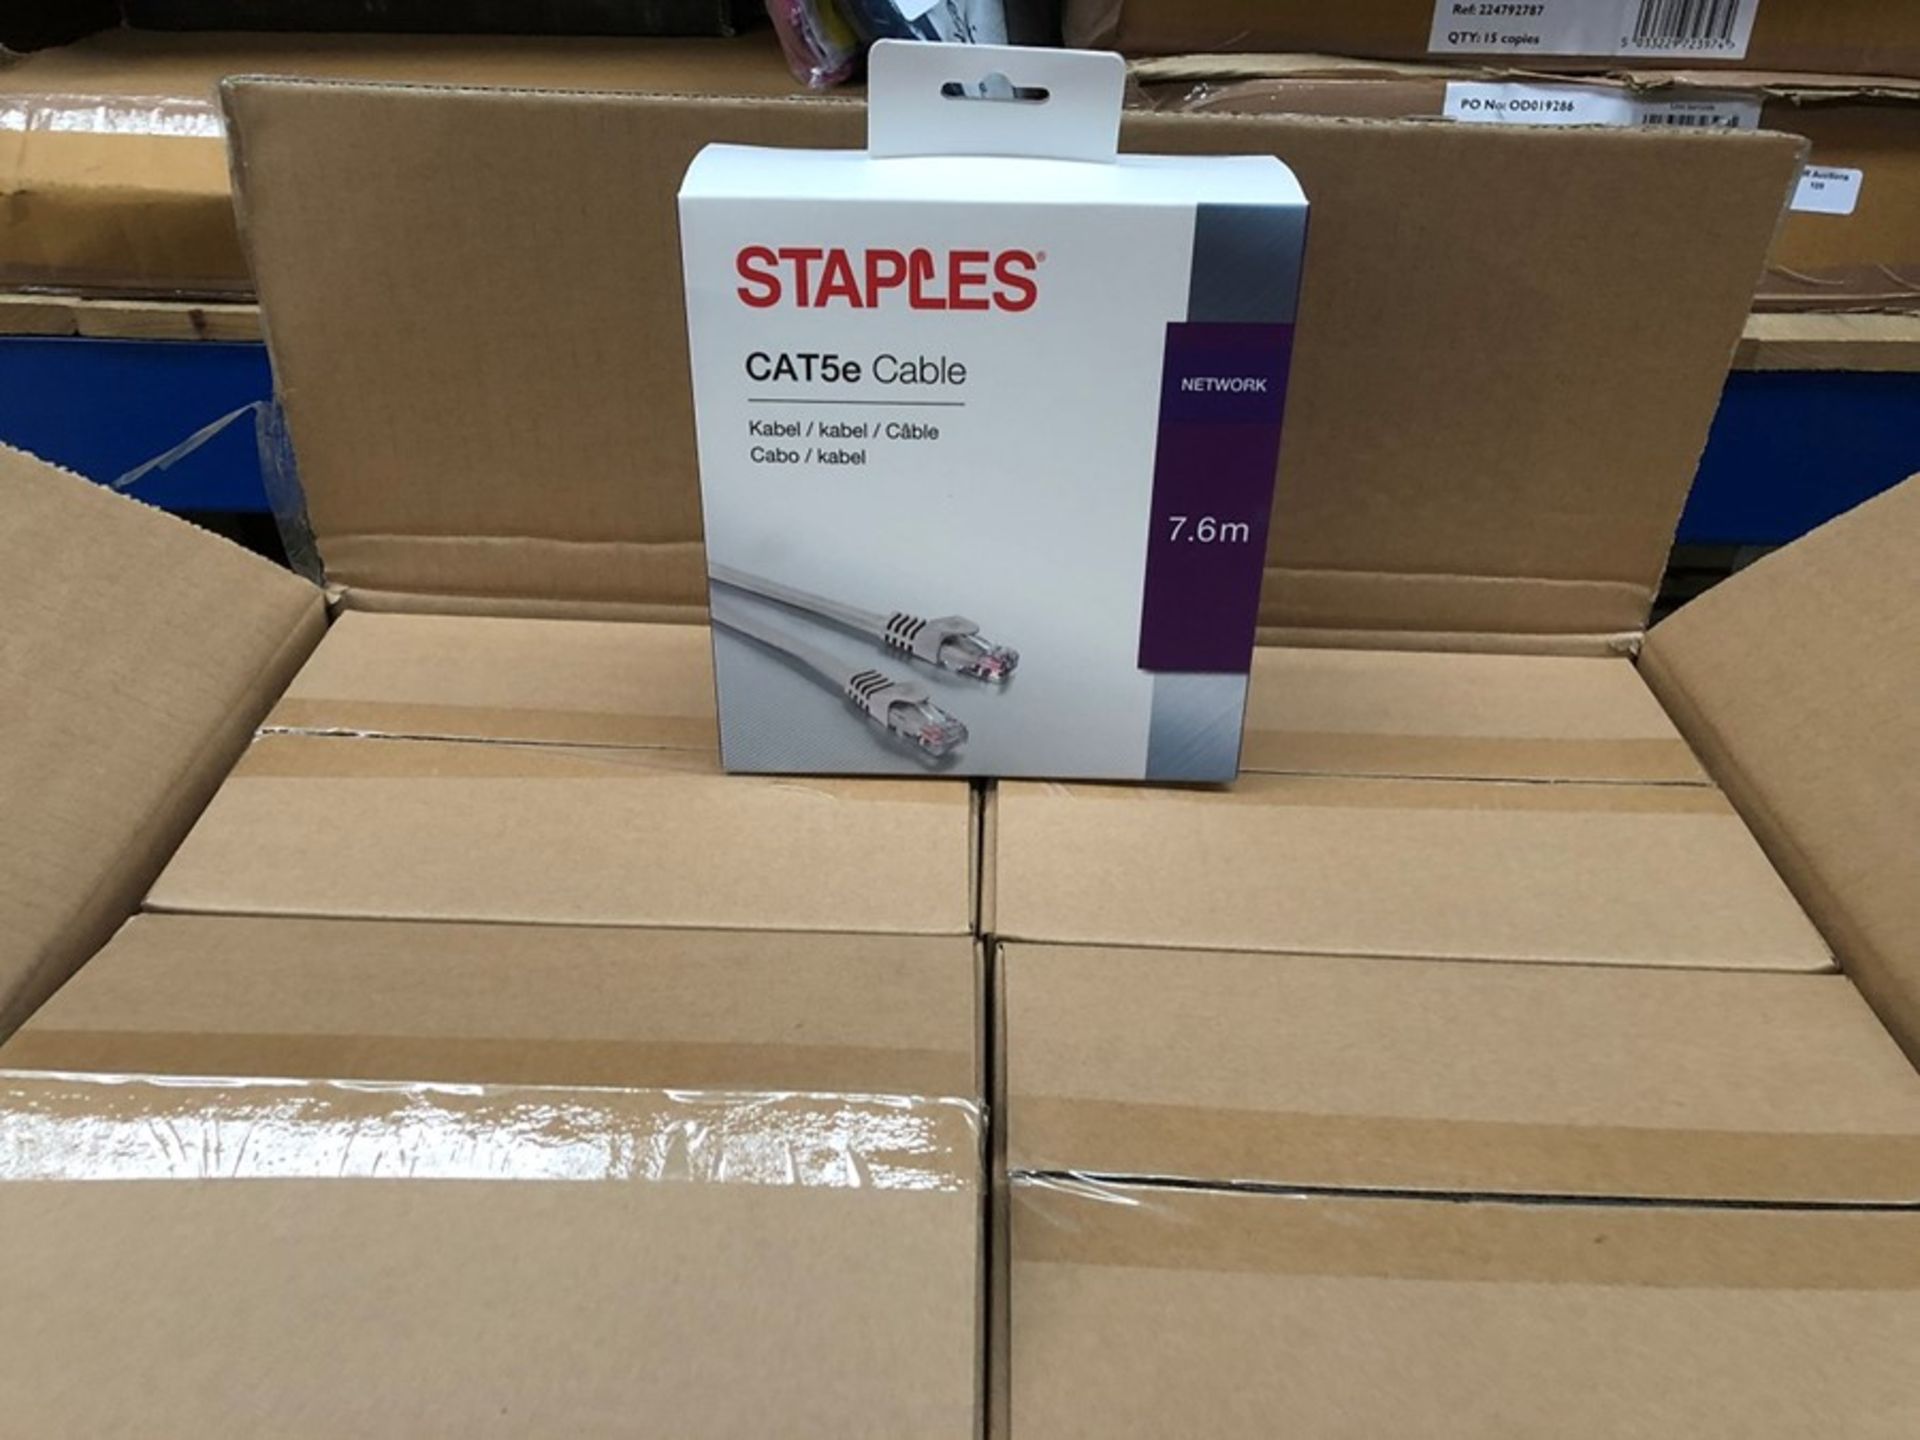 1 LOT TO CONTAIN 16 UNITS OF STAPLES CAT5E CABLES IN GREY - 7.6M / PN - 864 (PUBLIC VIEWING